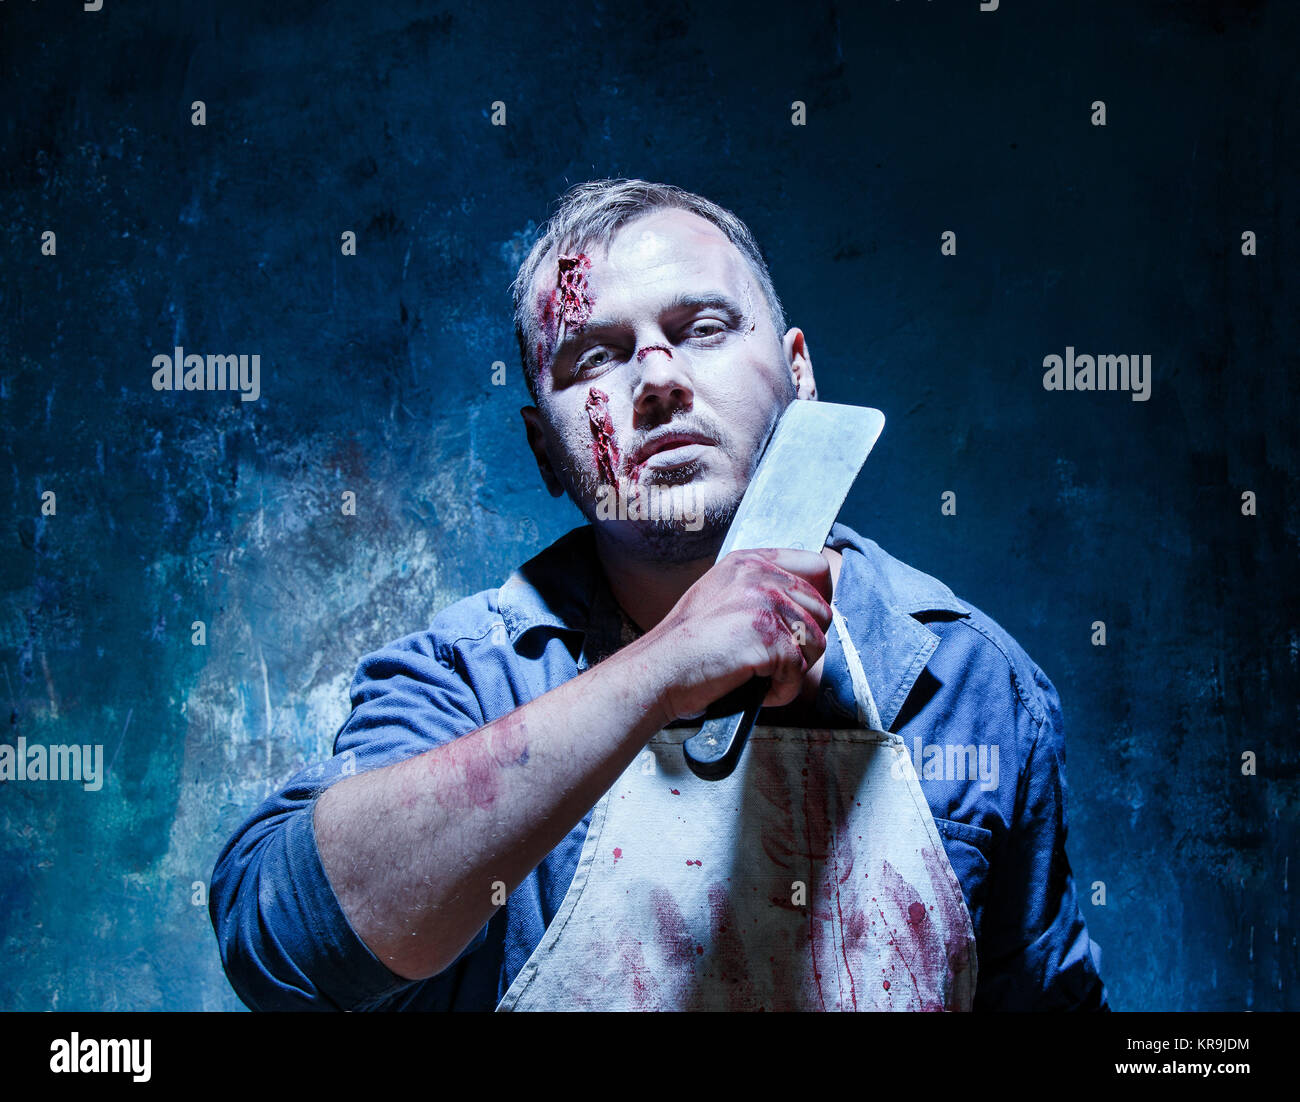 Bloody Halloween theme: crazy killer as butcher with a knife Stock Photo